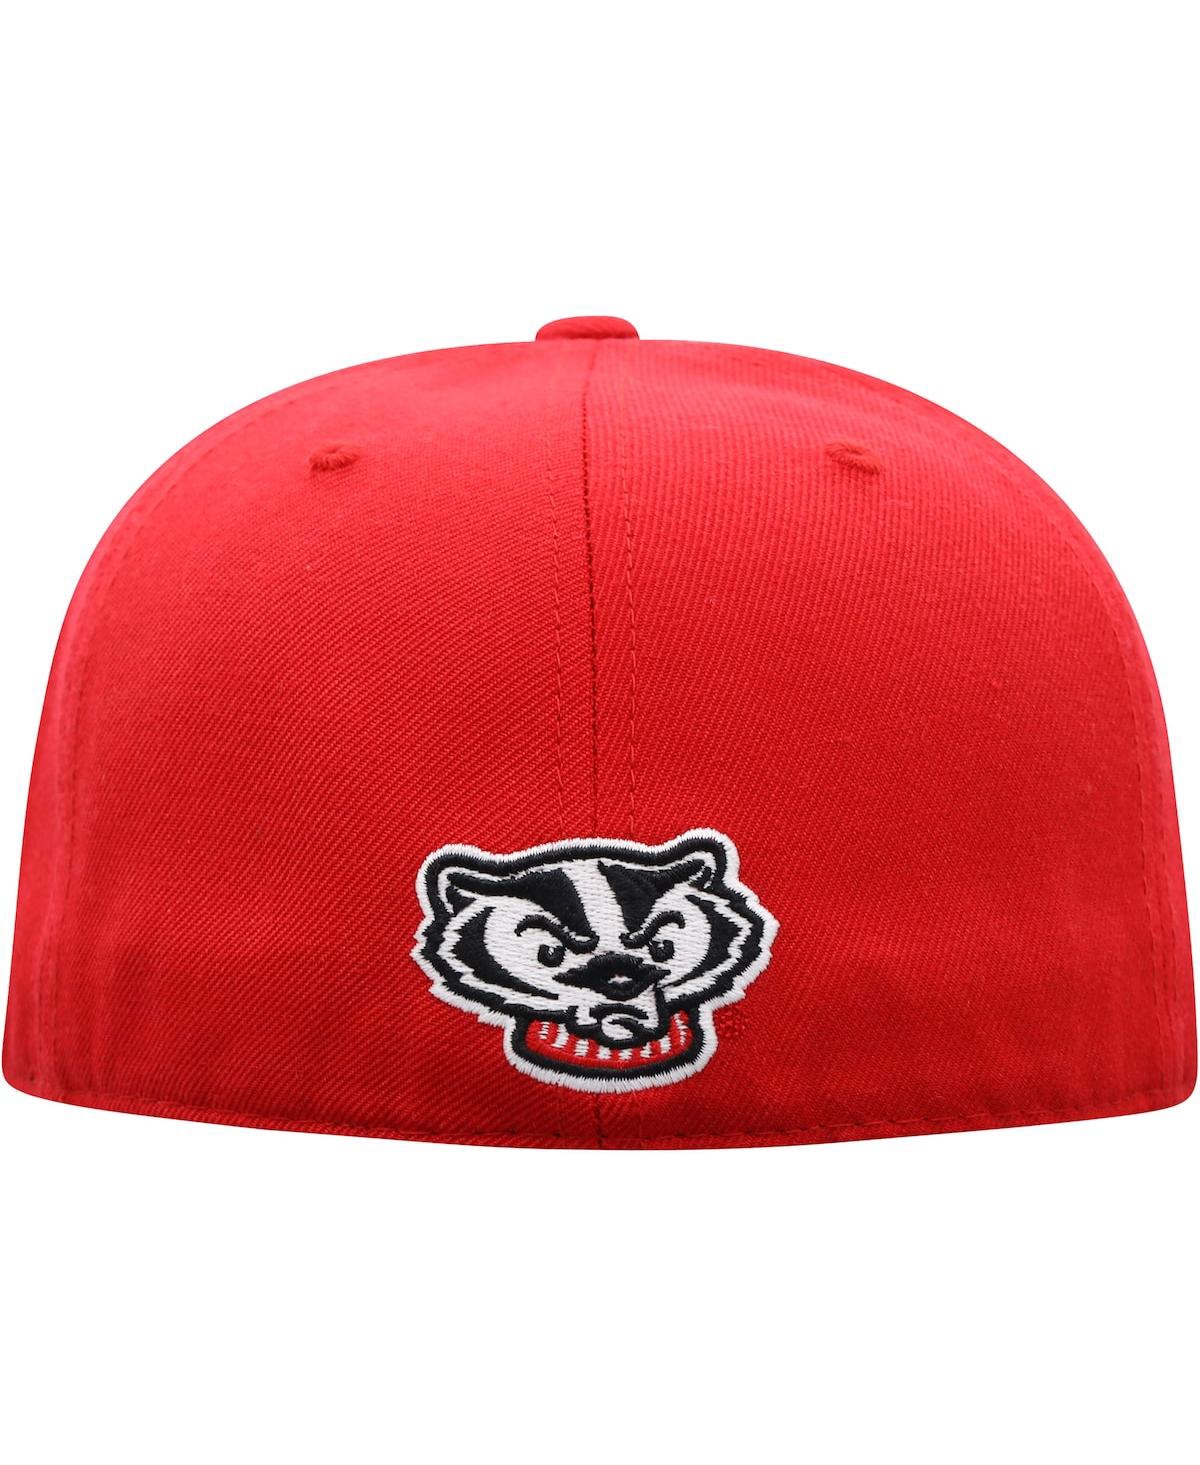 Shop Top Of The World Men's  Red Wisconsin Badgers Team Color Fitted Hat